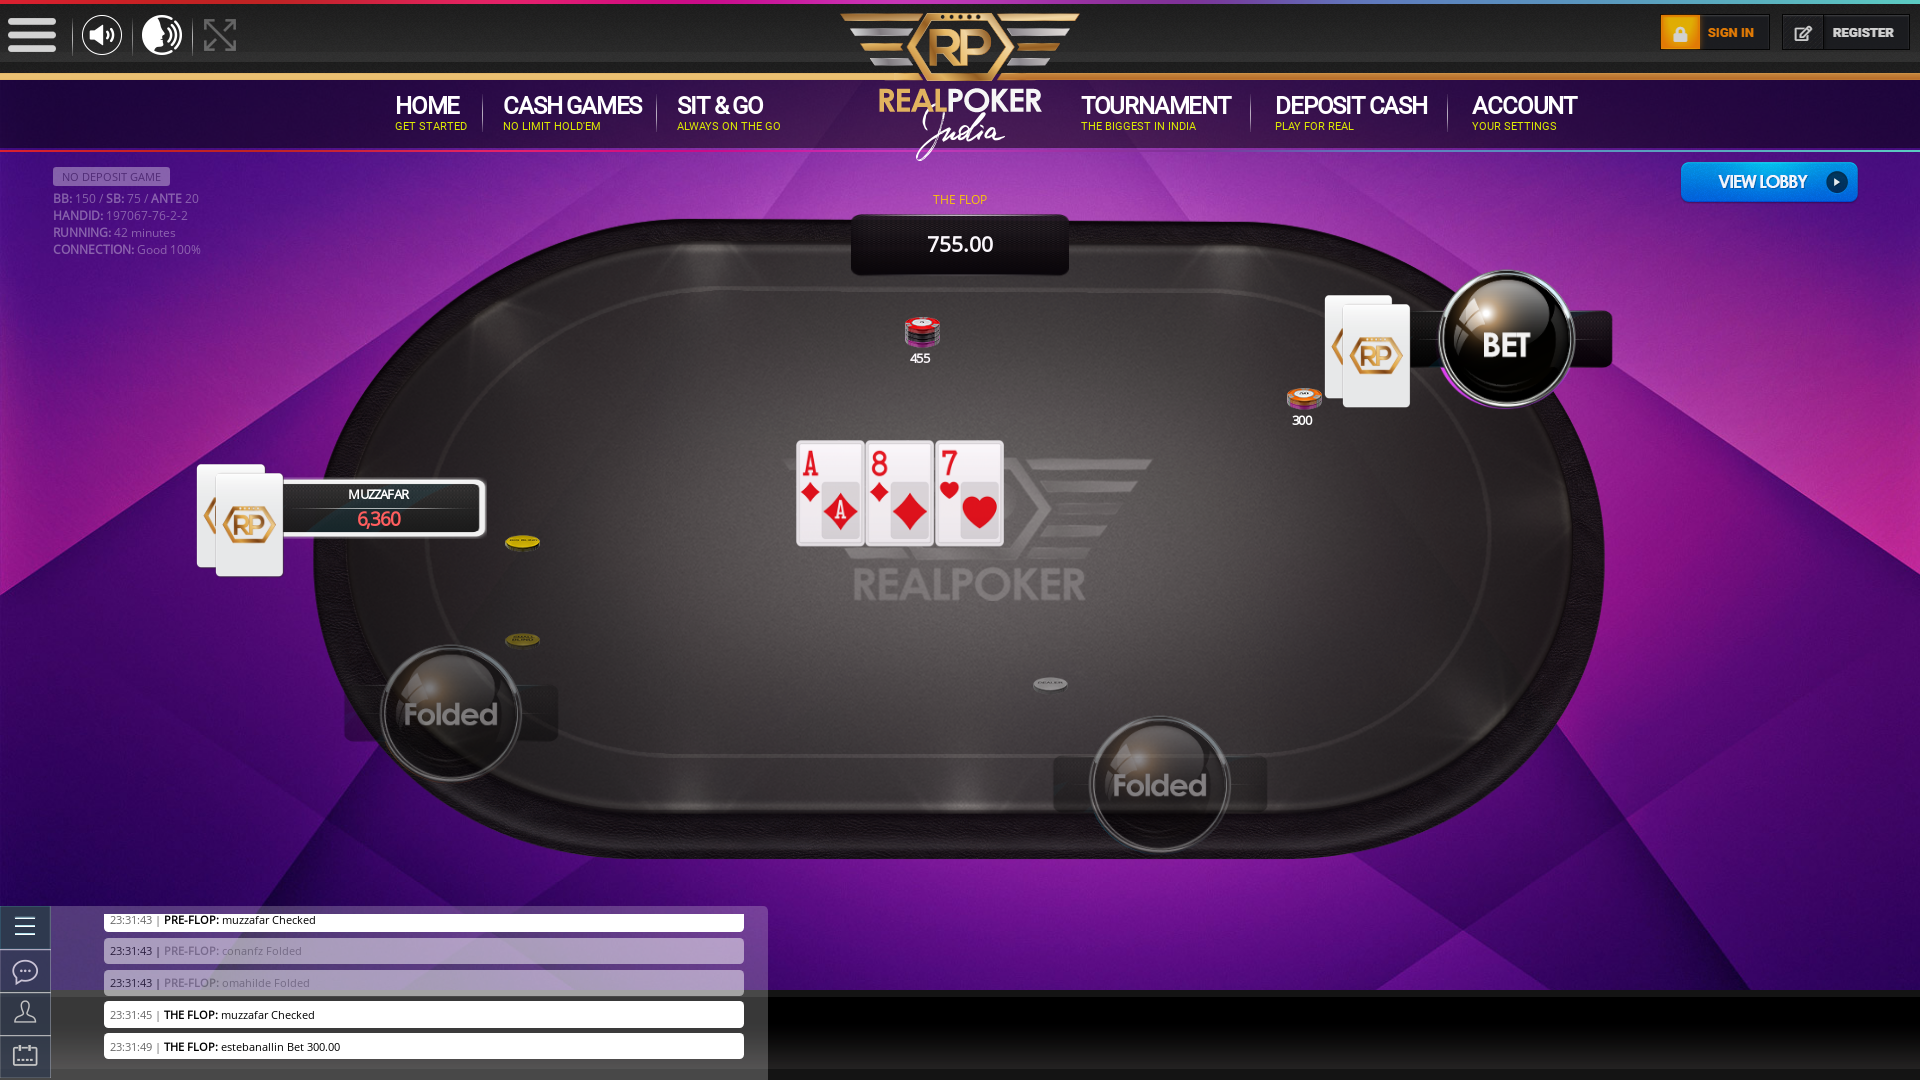 Online poker on a 10 player table in the 42nd minute match up